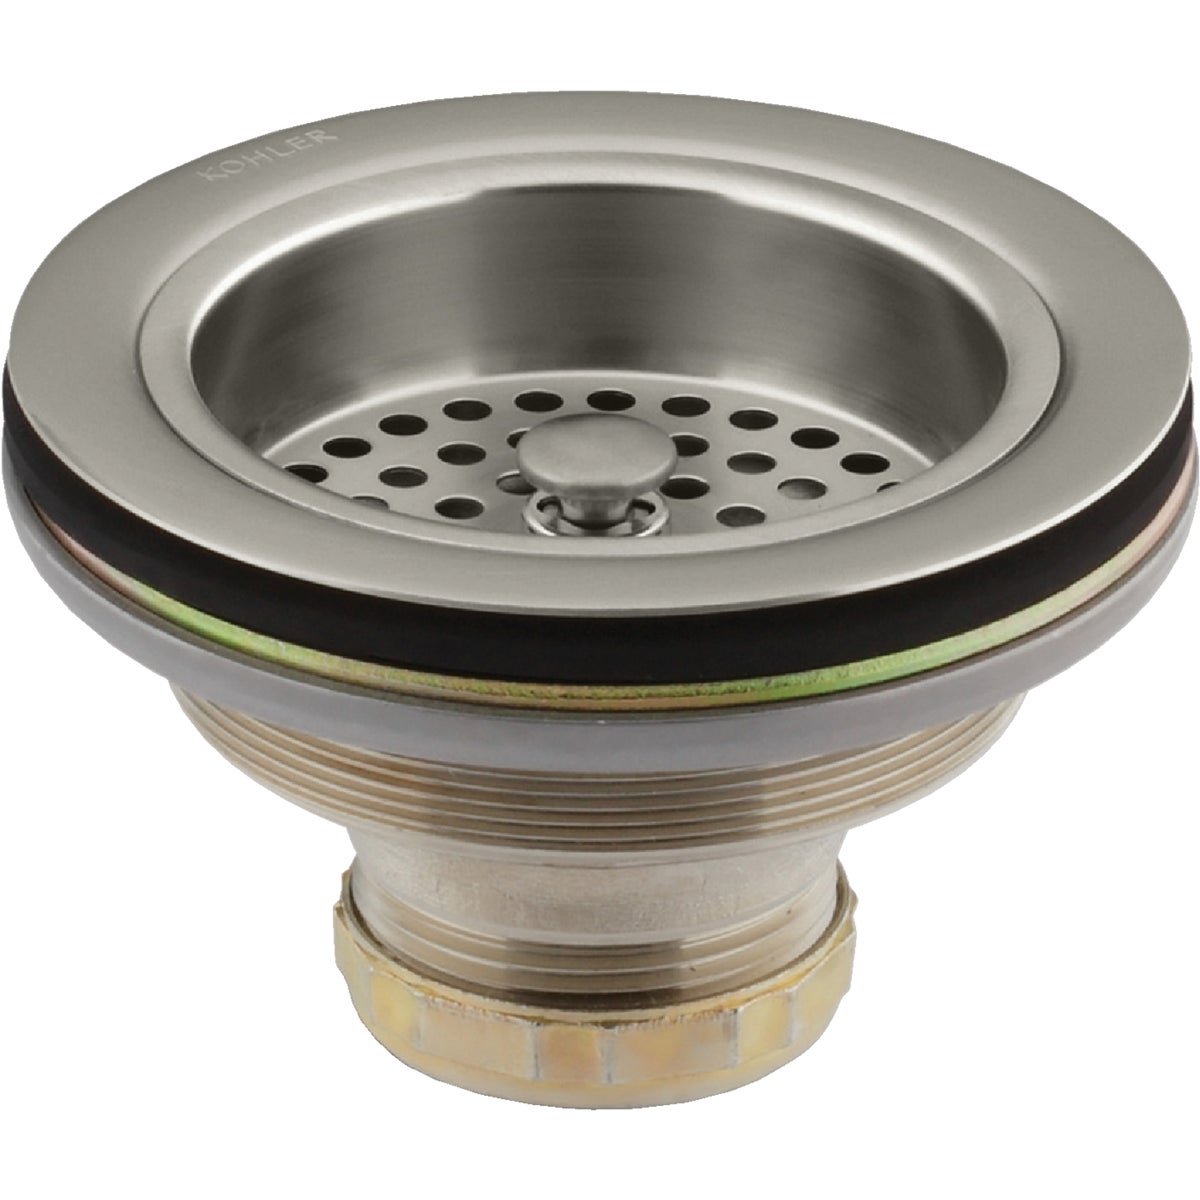 Kohler Duostrainer 3-1/2 In. to 4 In. Opening Basket Strainer Assembly in Vibrant Stainless Finish